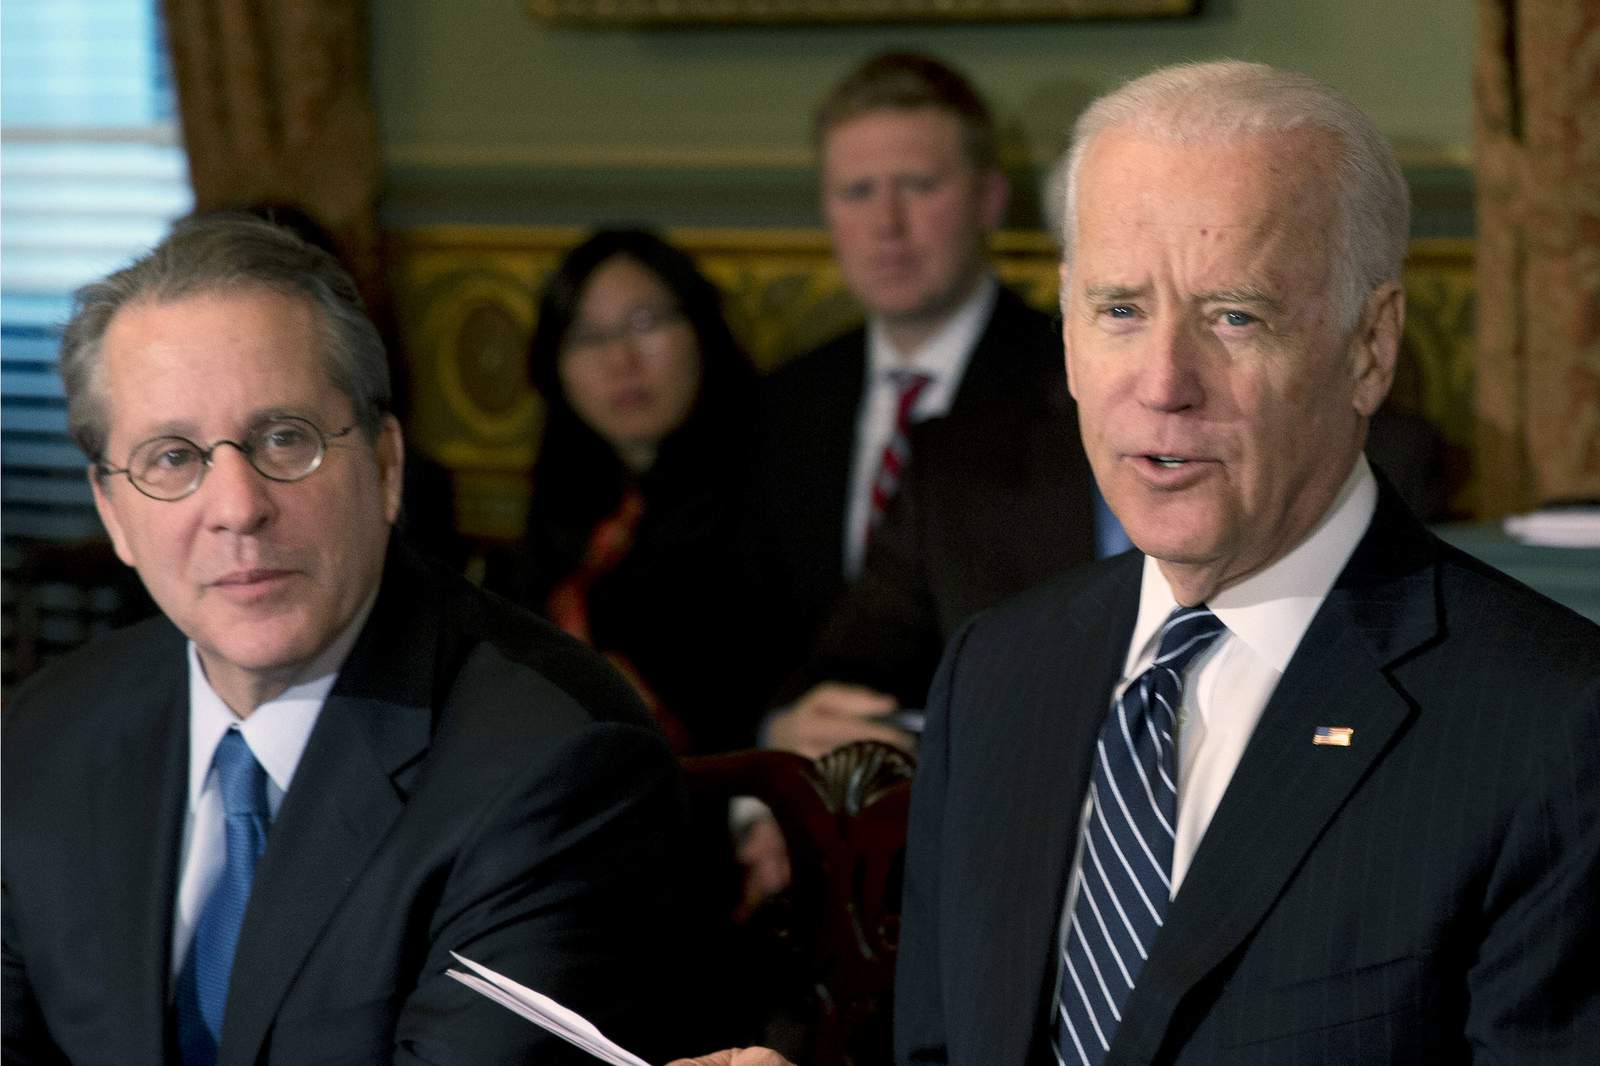 President Biden to name Sperling to oversee COVID-19 relief package